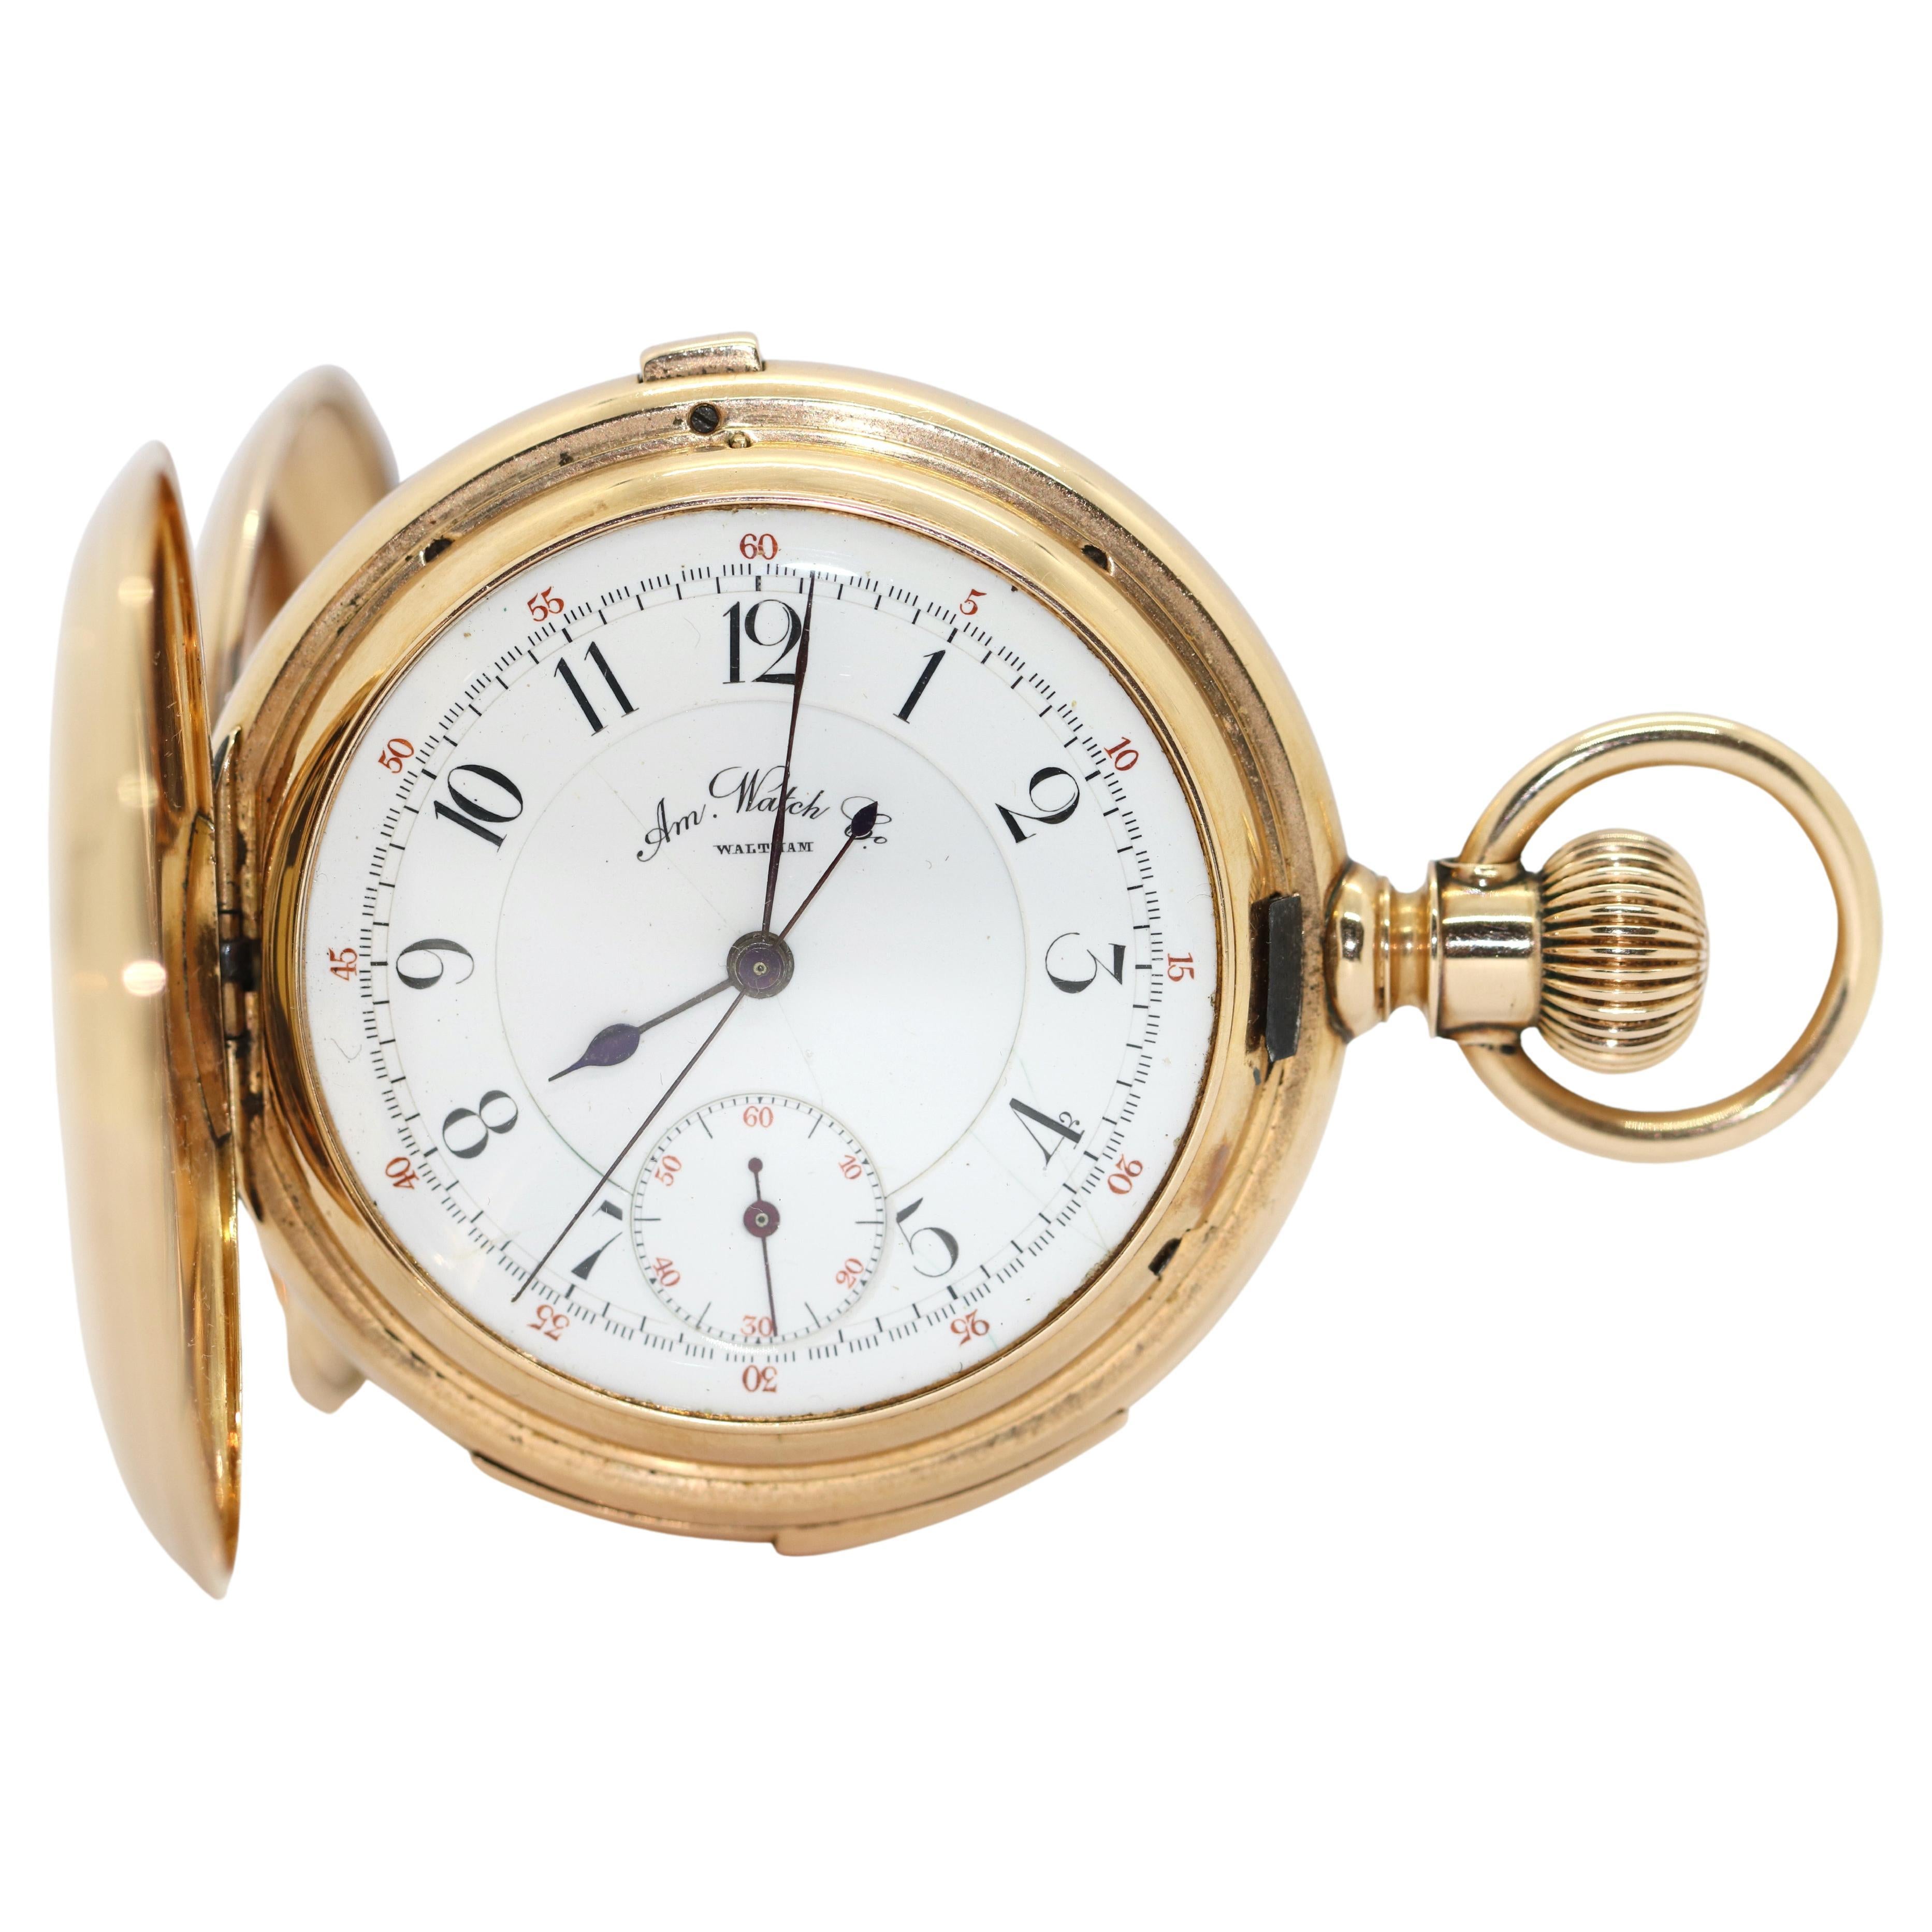 14K Gold Pocket Hunter Watch by American Watch Co. Waltham, Chronograph Repeater For Sale